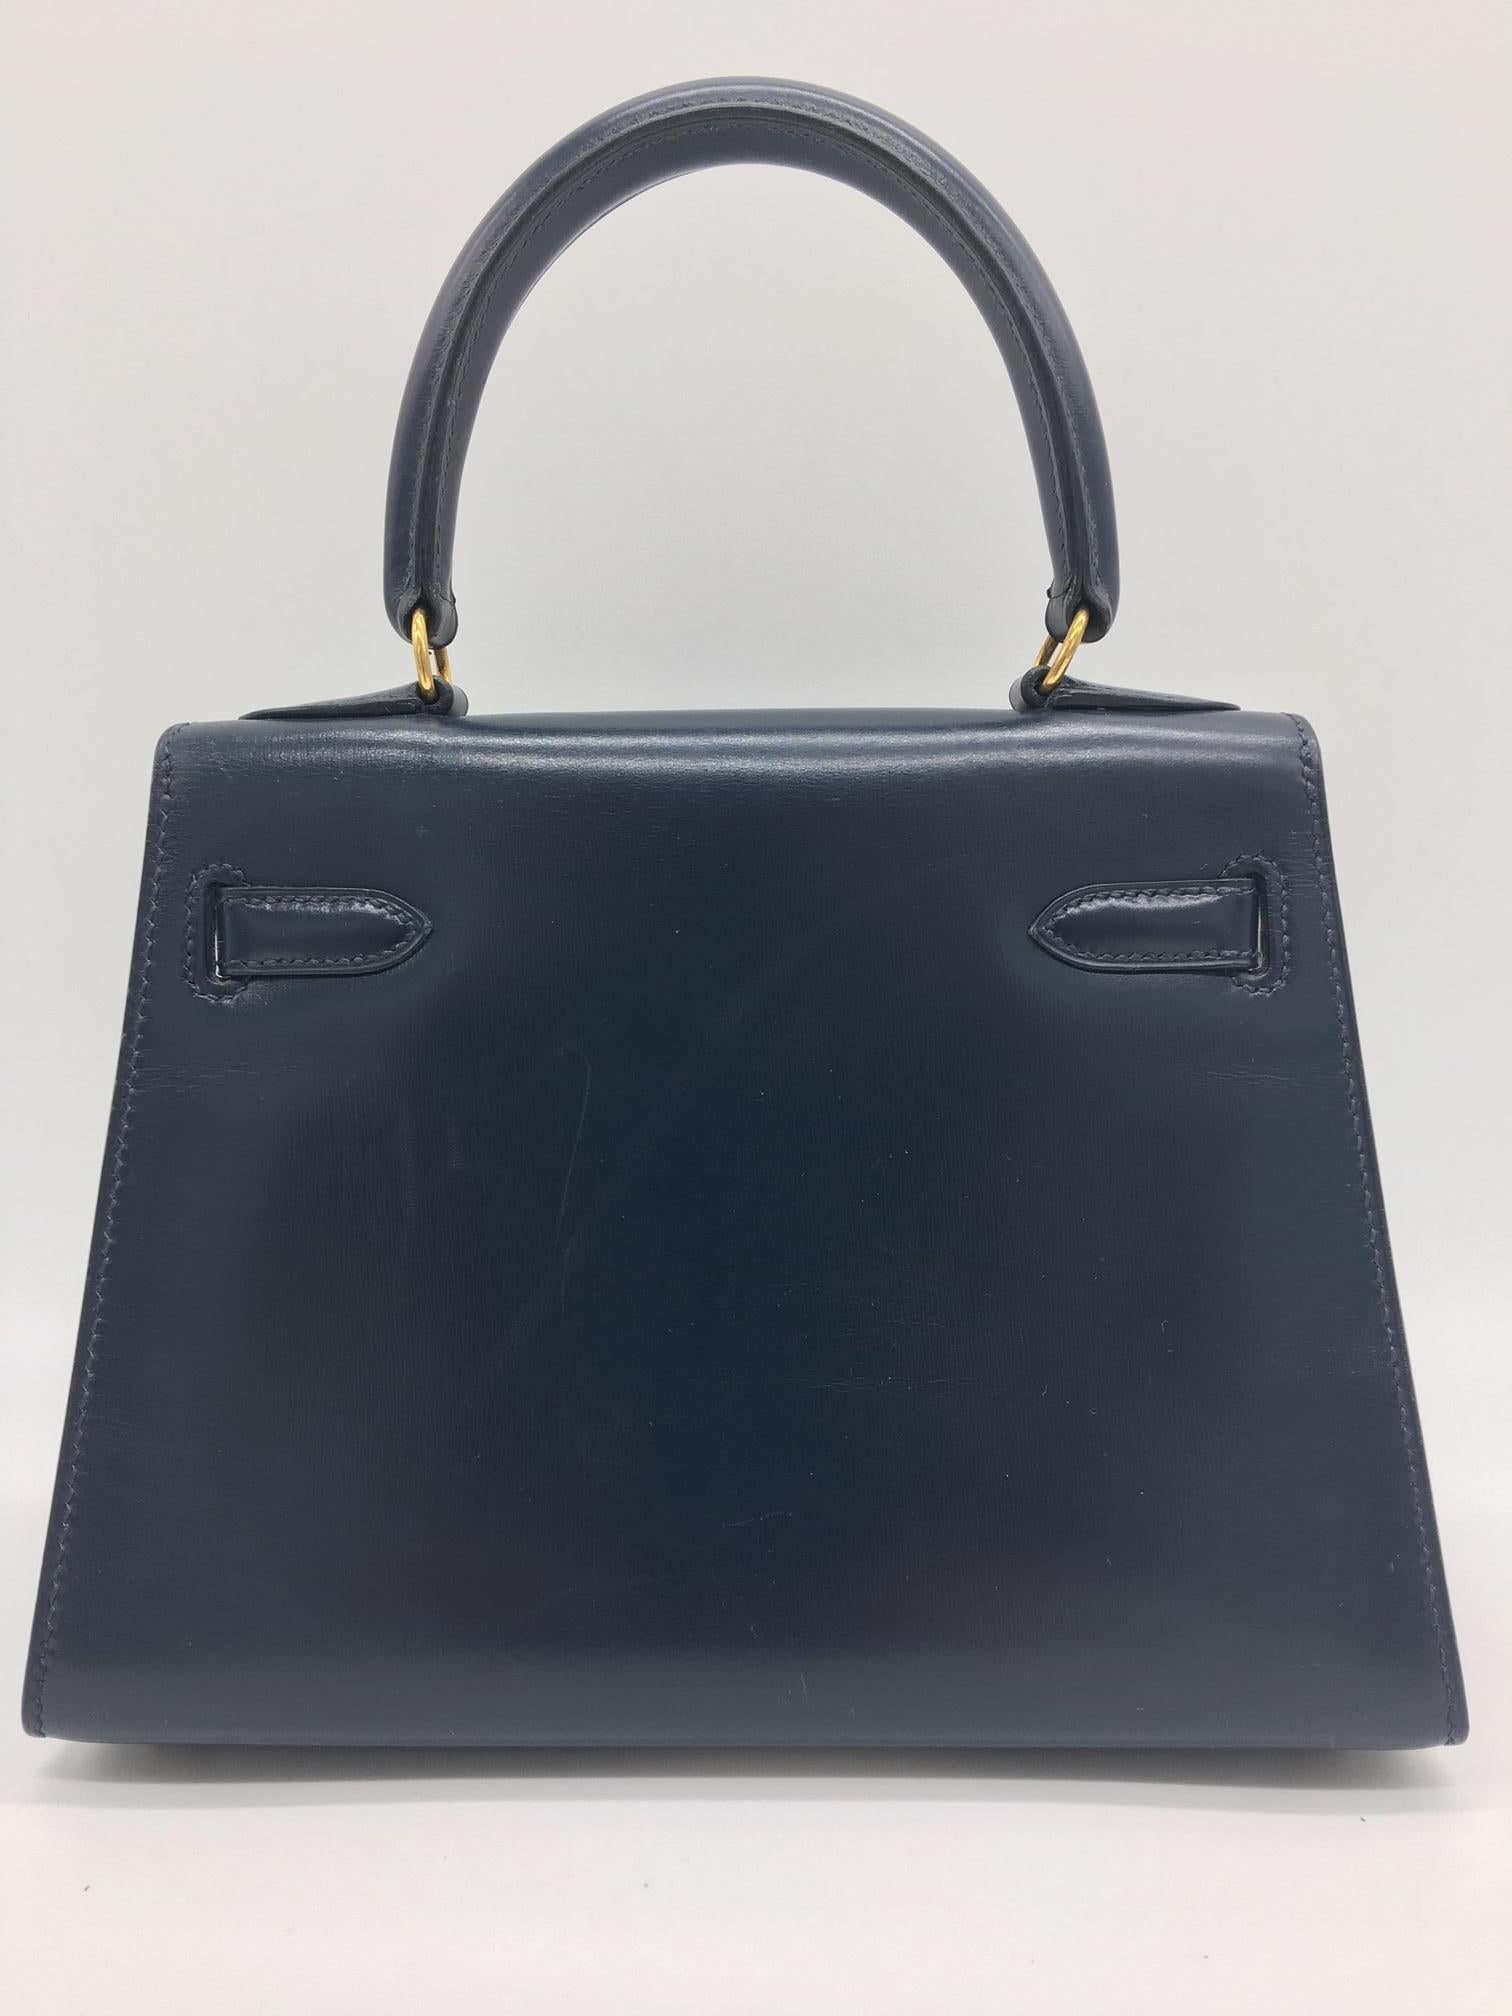 These beautiful bags are no longer made so are very sought after and we are lucky enough to have this gorgeous little Kelly in very dark blue available. S stamp, in good condition with just a few scratches on the leather and hardware, in keeping